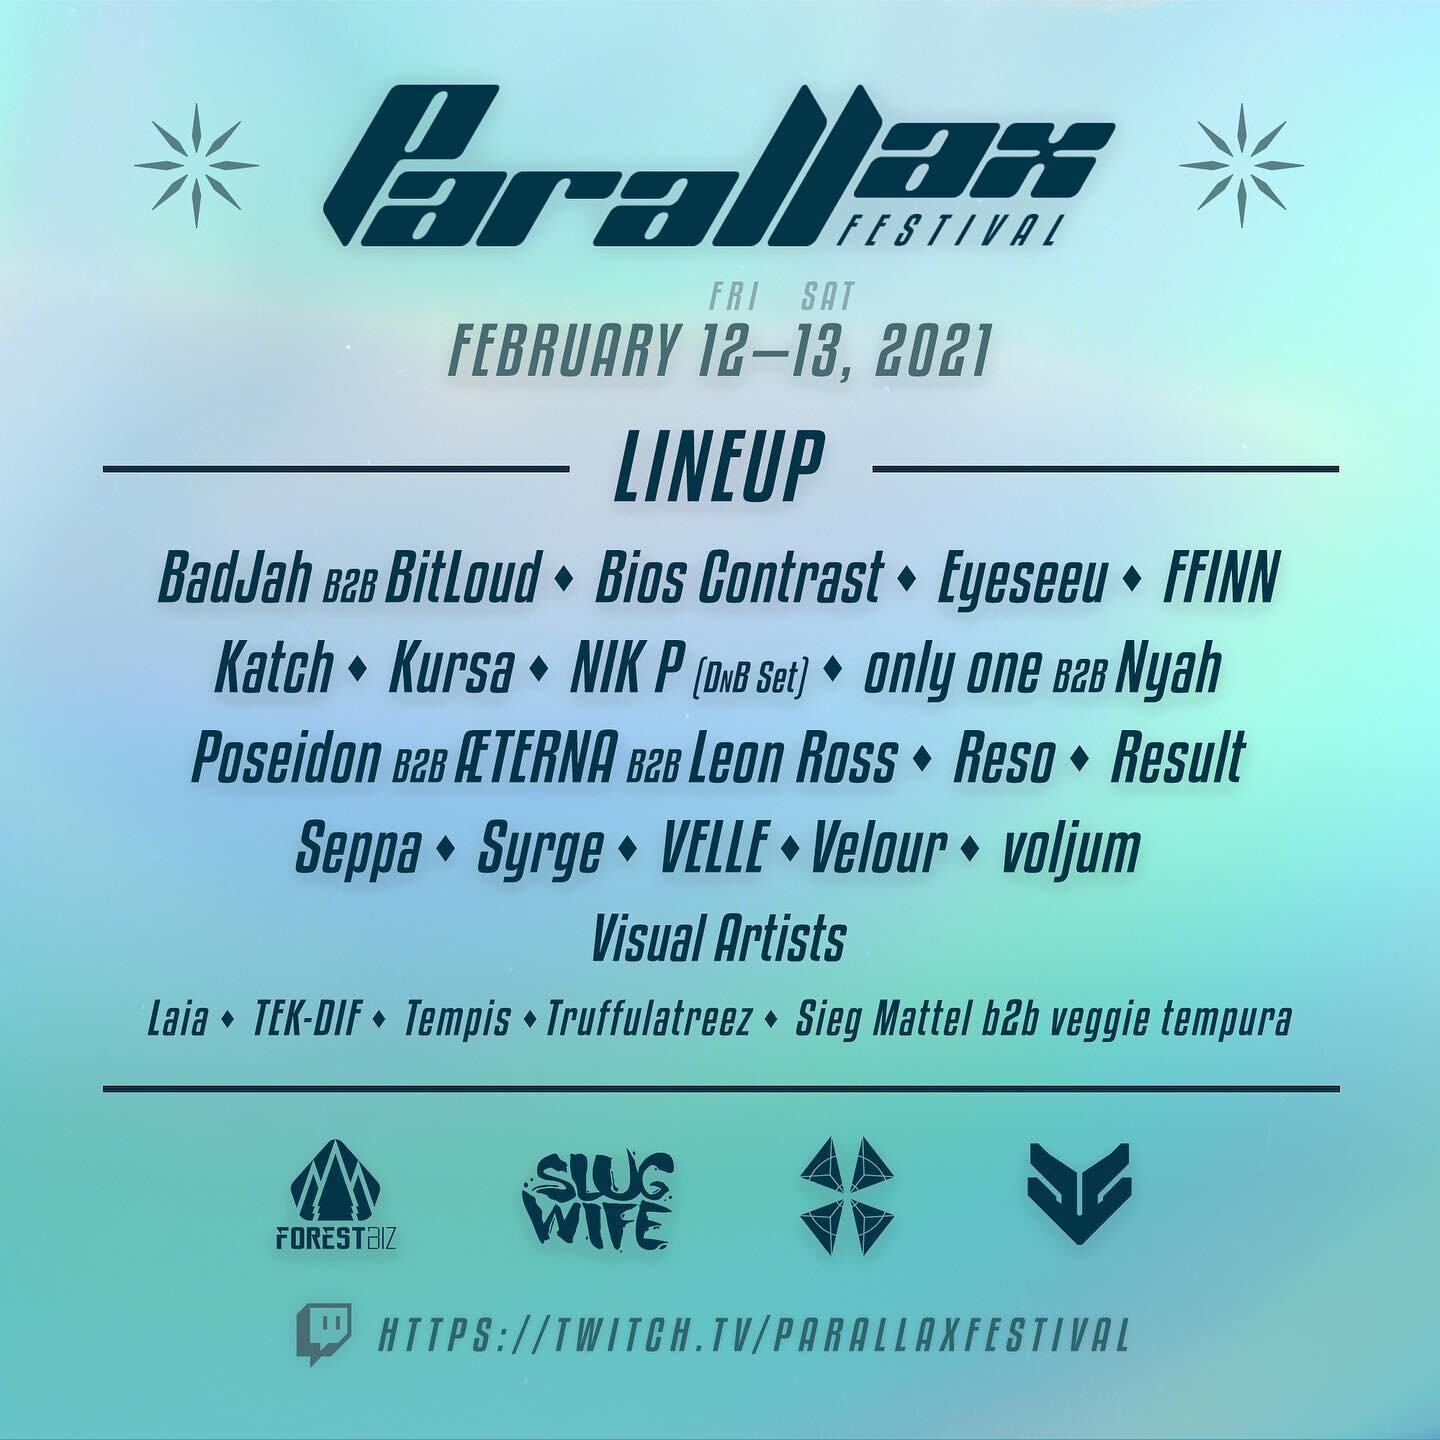 Presenting the full Parallax Festival II line up alongside our friends @forest_biz, @_slugwife_ &amp; @sanctuarycollective_. Streaming on February 12-13th, 5 PM to 9 PM EST both days via Twitch. 

Our visuals will be done by @madebynikp ∙ @siegmattel